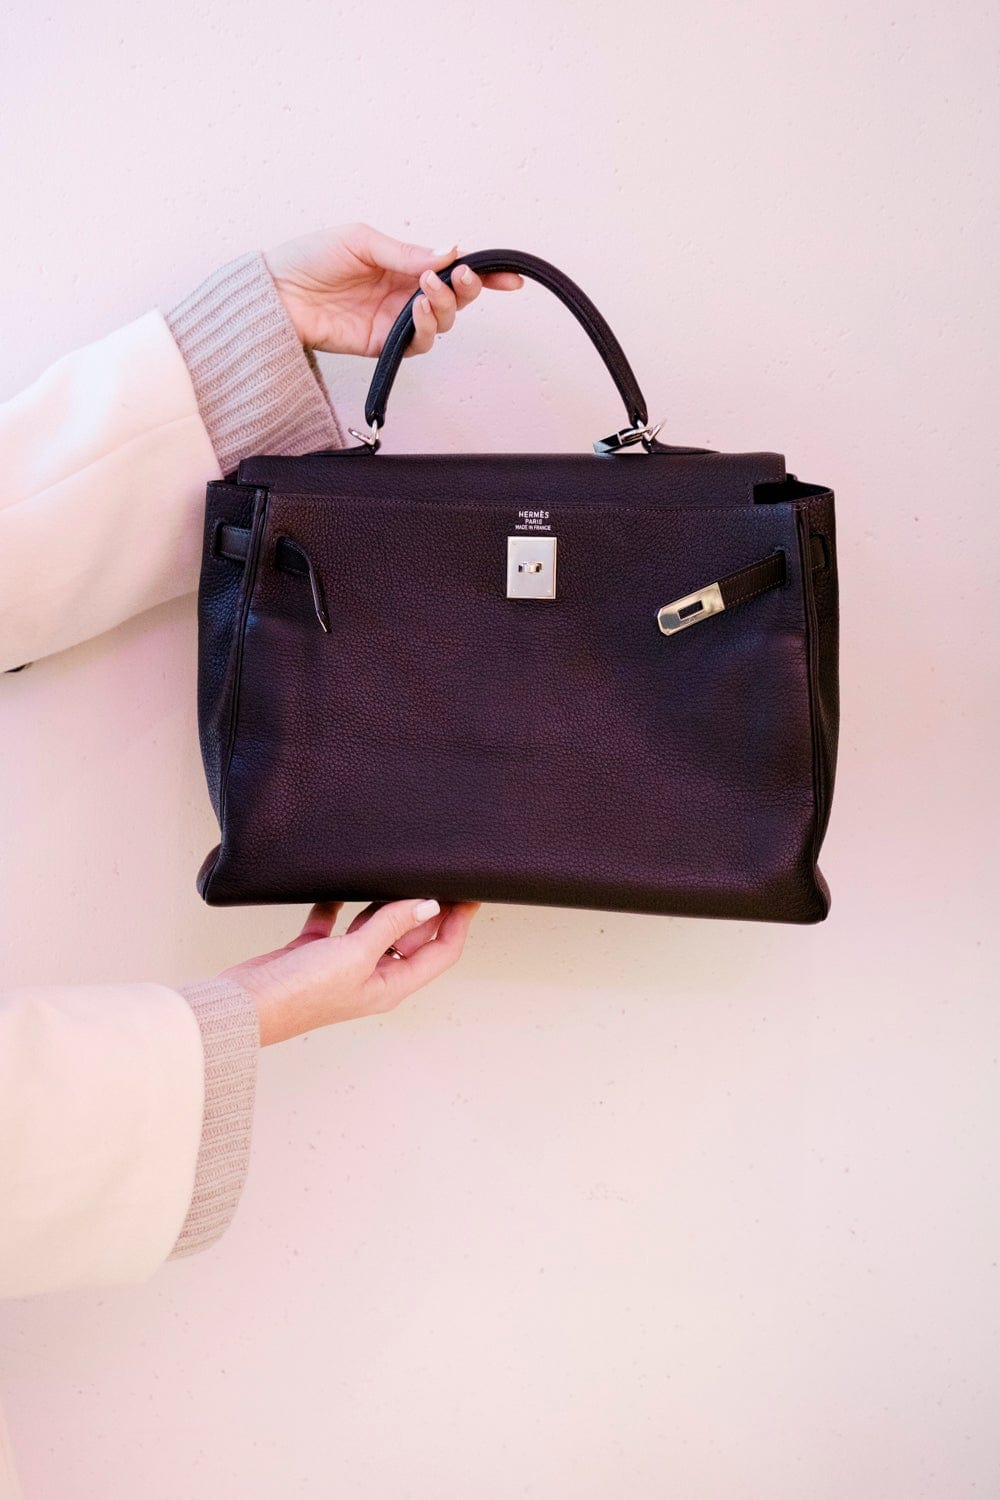 Hermes Kelly 35cm Blue-lin Clemence Leather with Palladium-Plated Hardware  #OCTL-1 – Luxuy Vintage